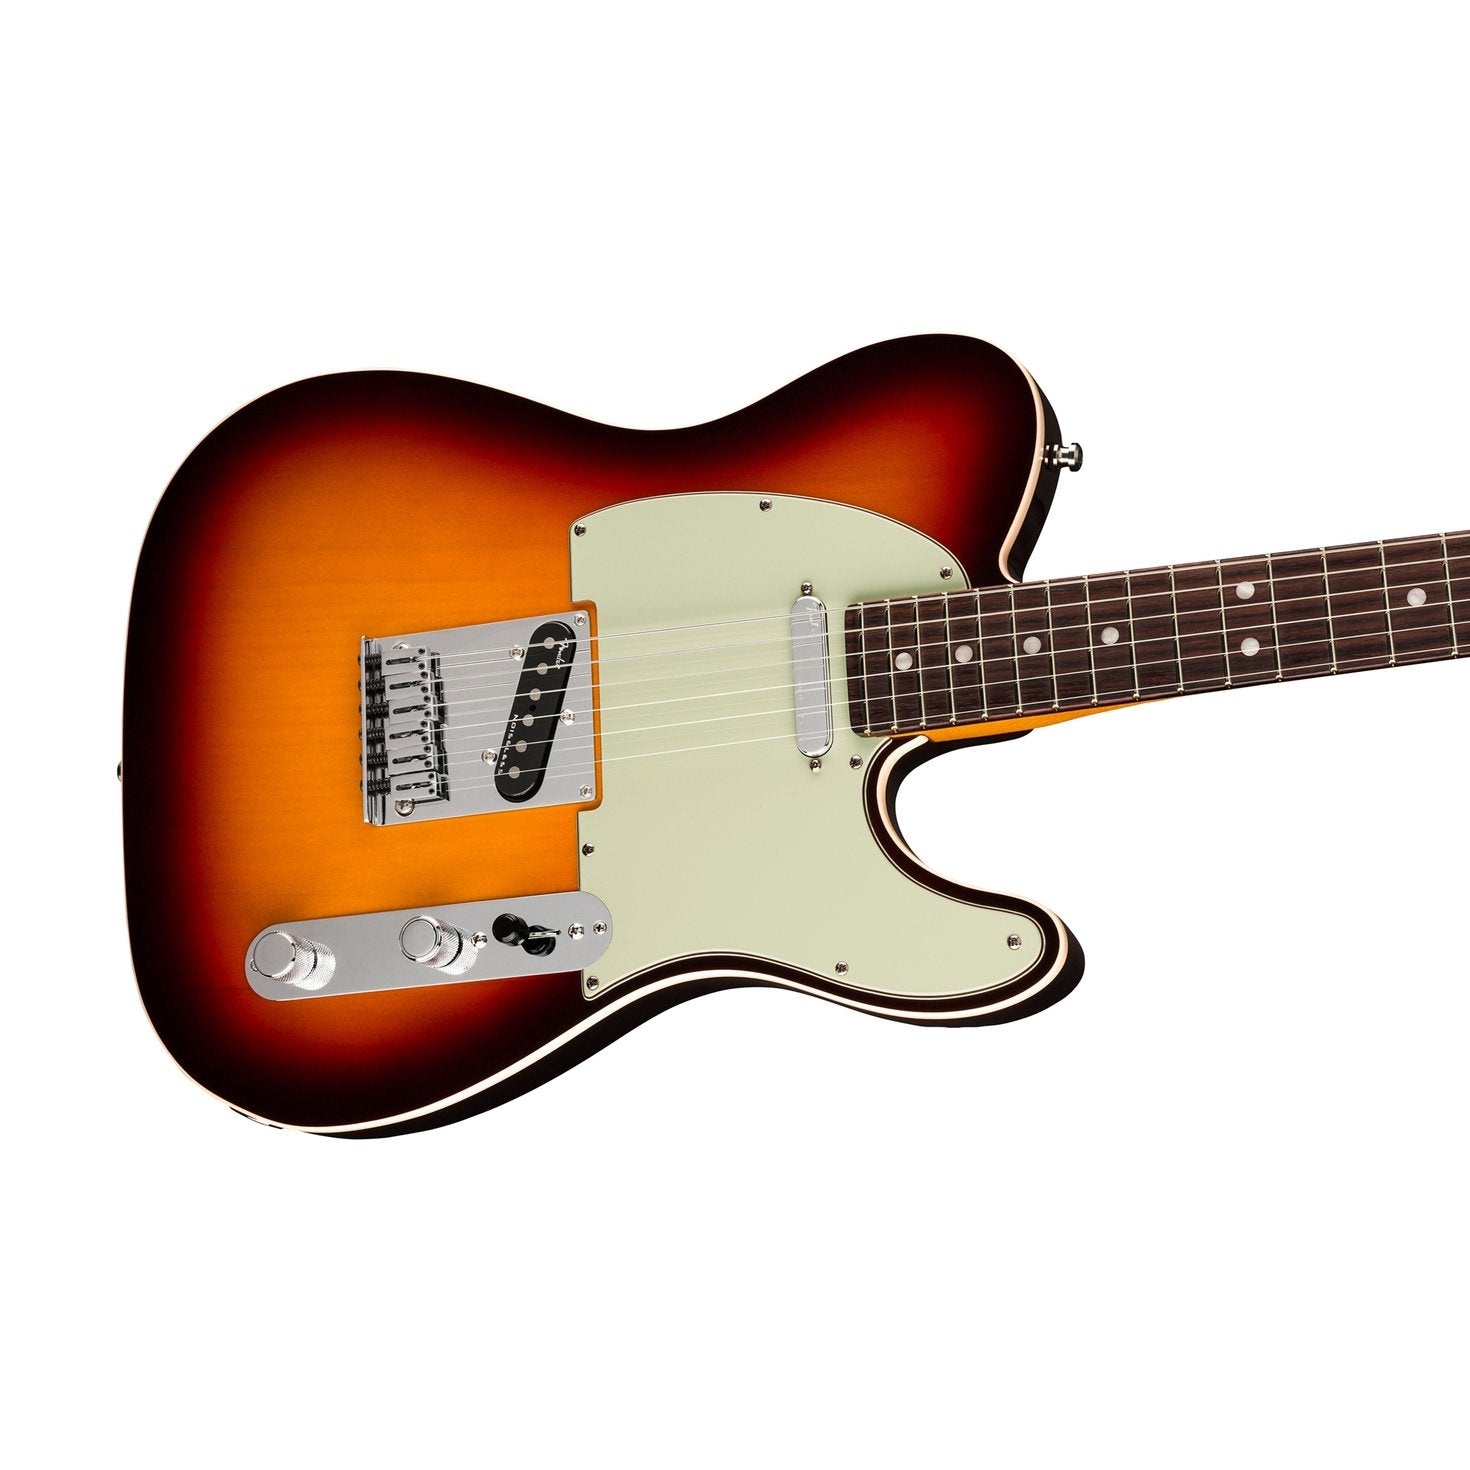 Fender American Ultra Telecaster Electric Guitar, RW FB, Ultraburst, FENDER, ELECTRIC GUITAR, fender-electric-guitar-f03-011-8030-712, ZOSO MUSIC SDN BHD